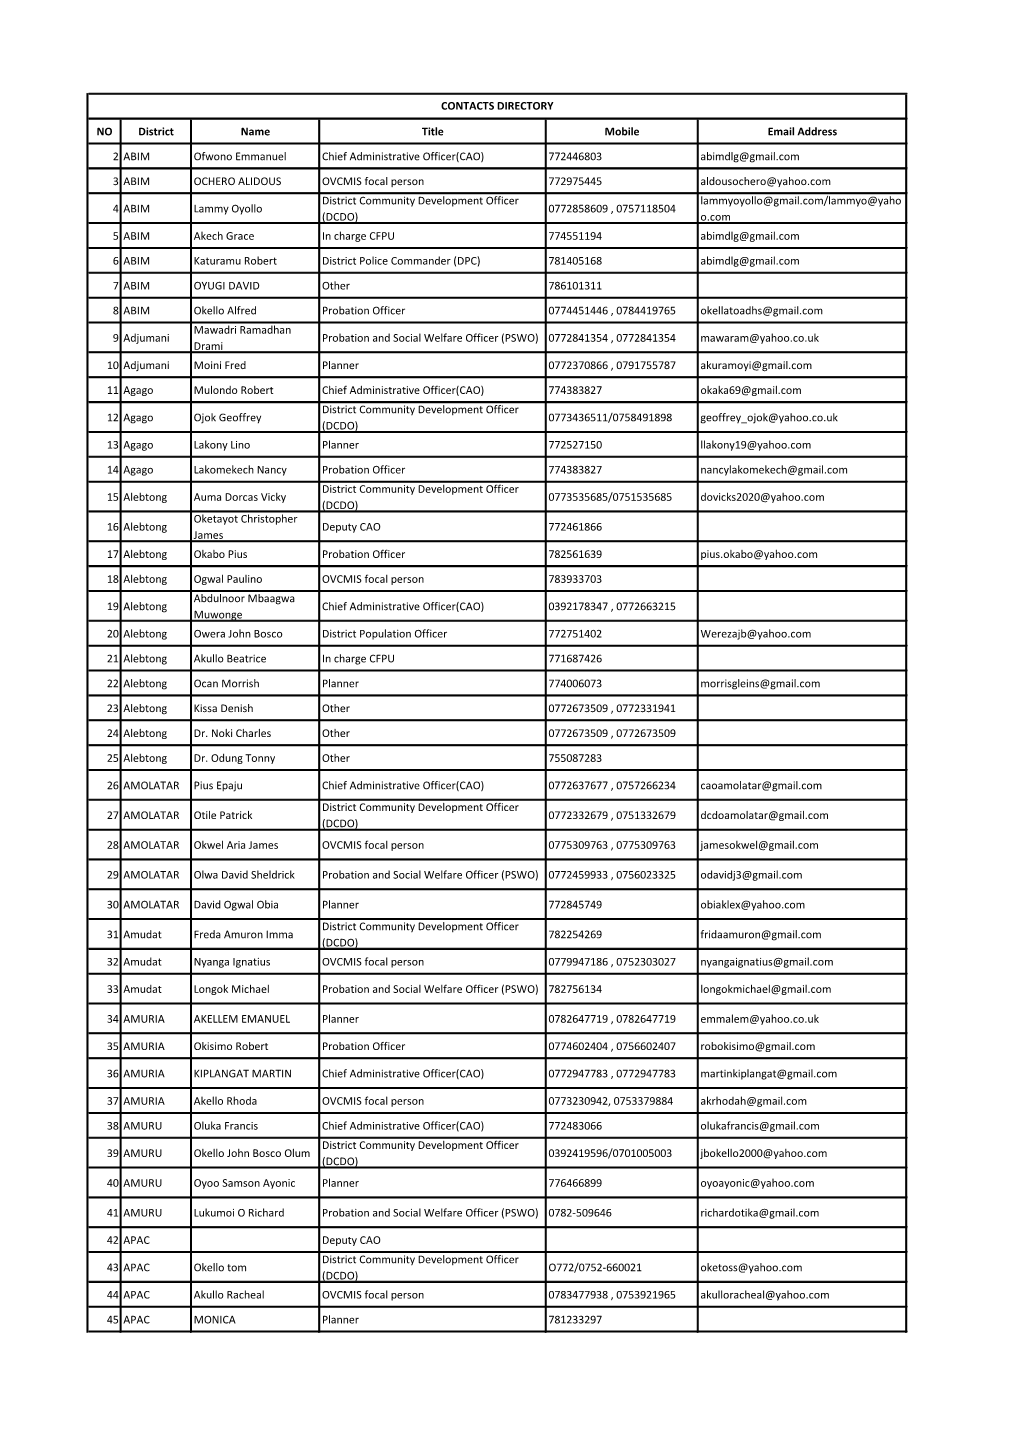 2020 List of Chief Administrative Officers in Uganda.Pdf